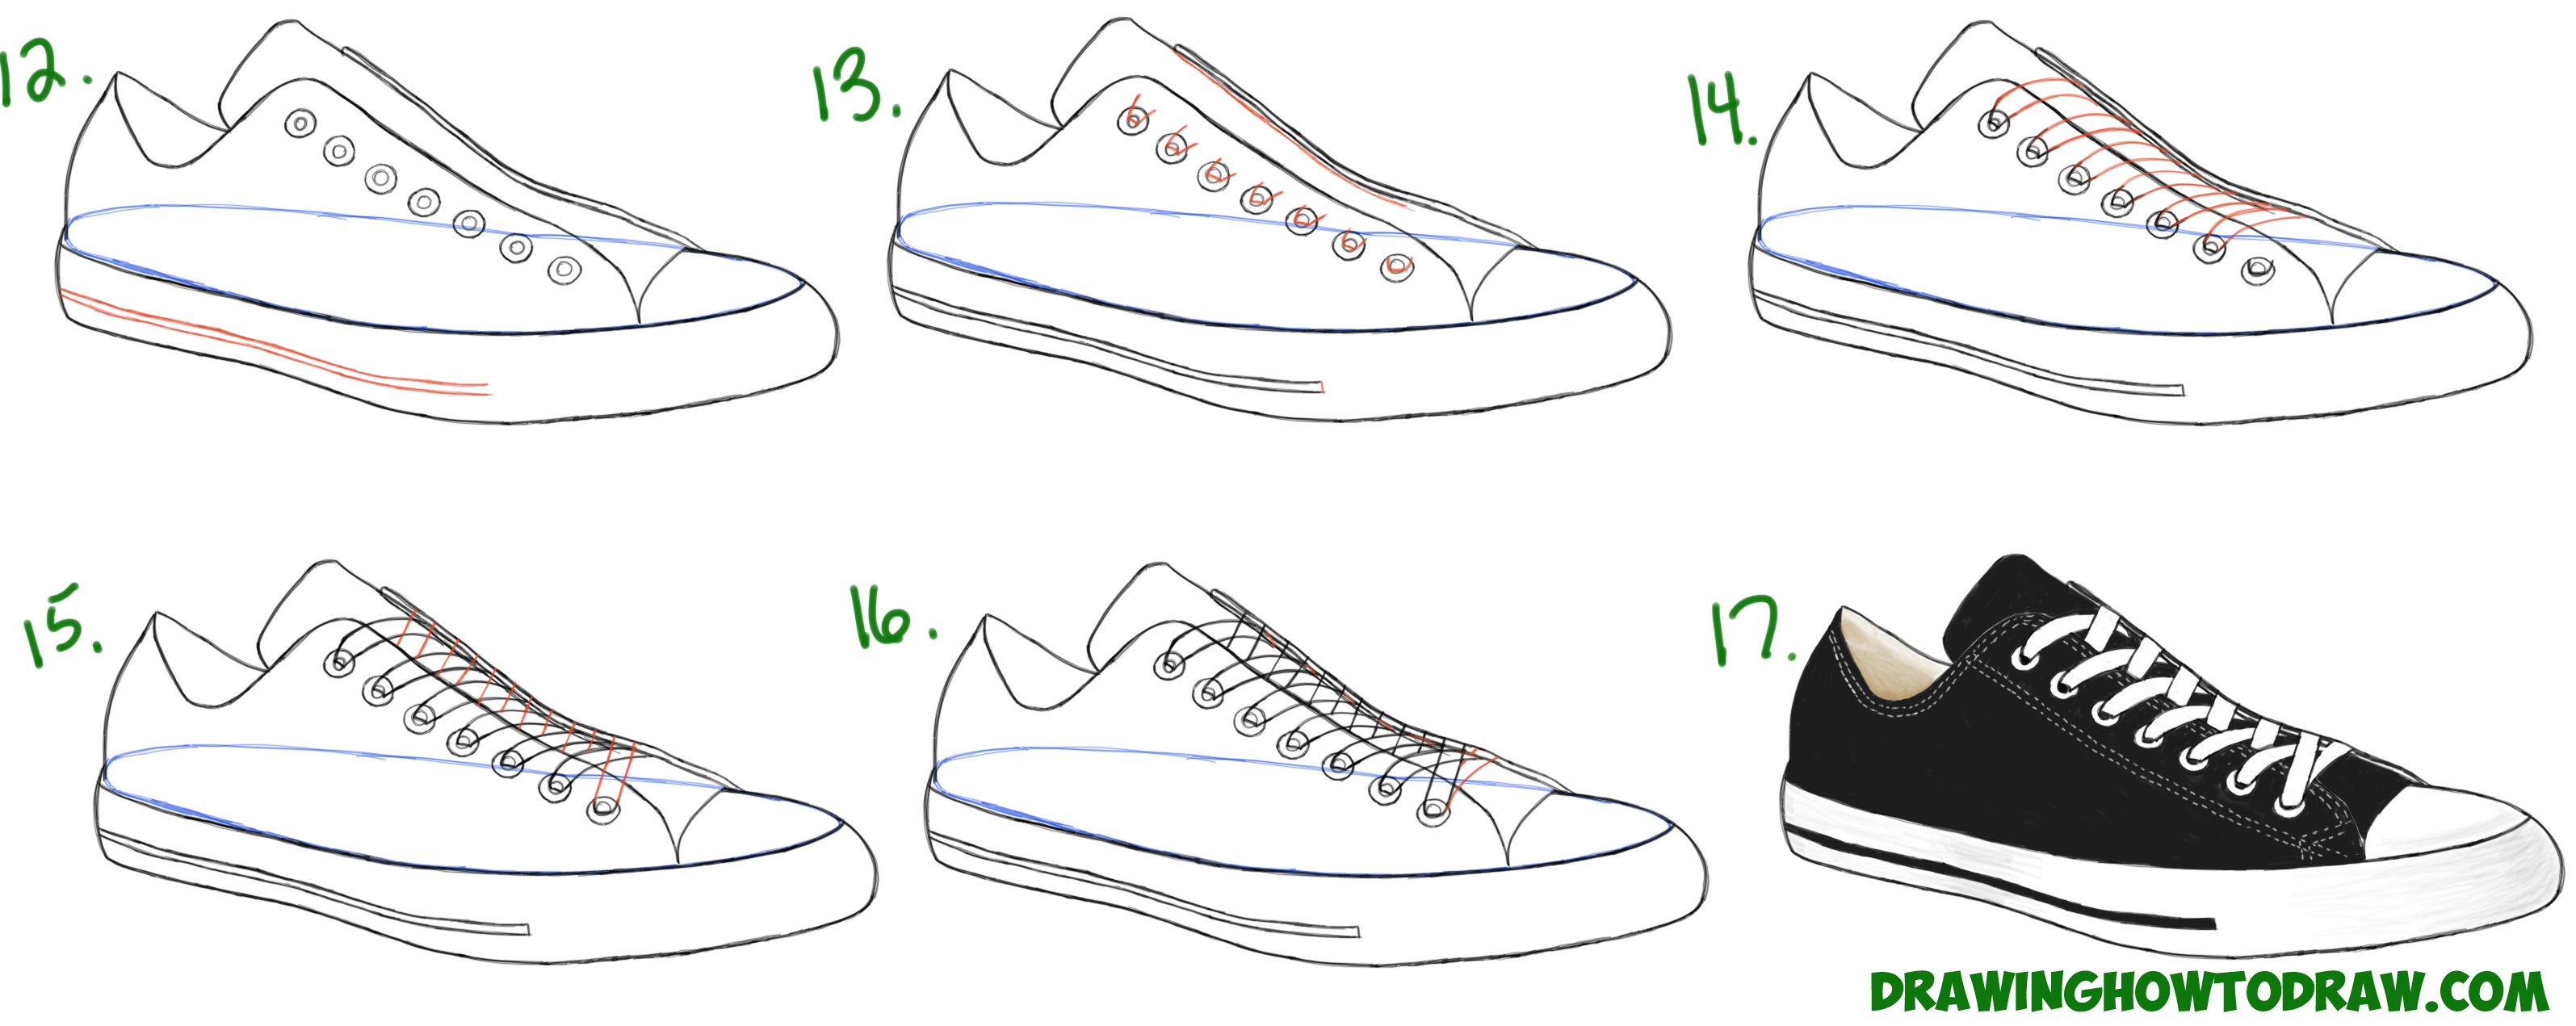 drawings of converse shoes